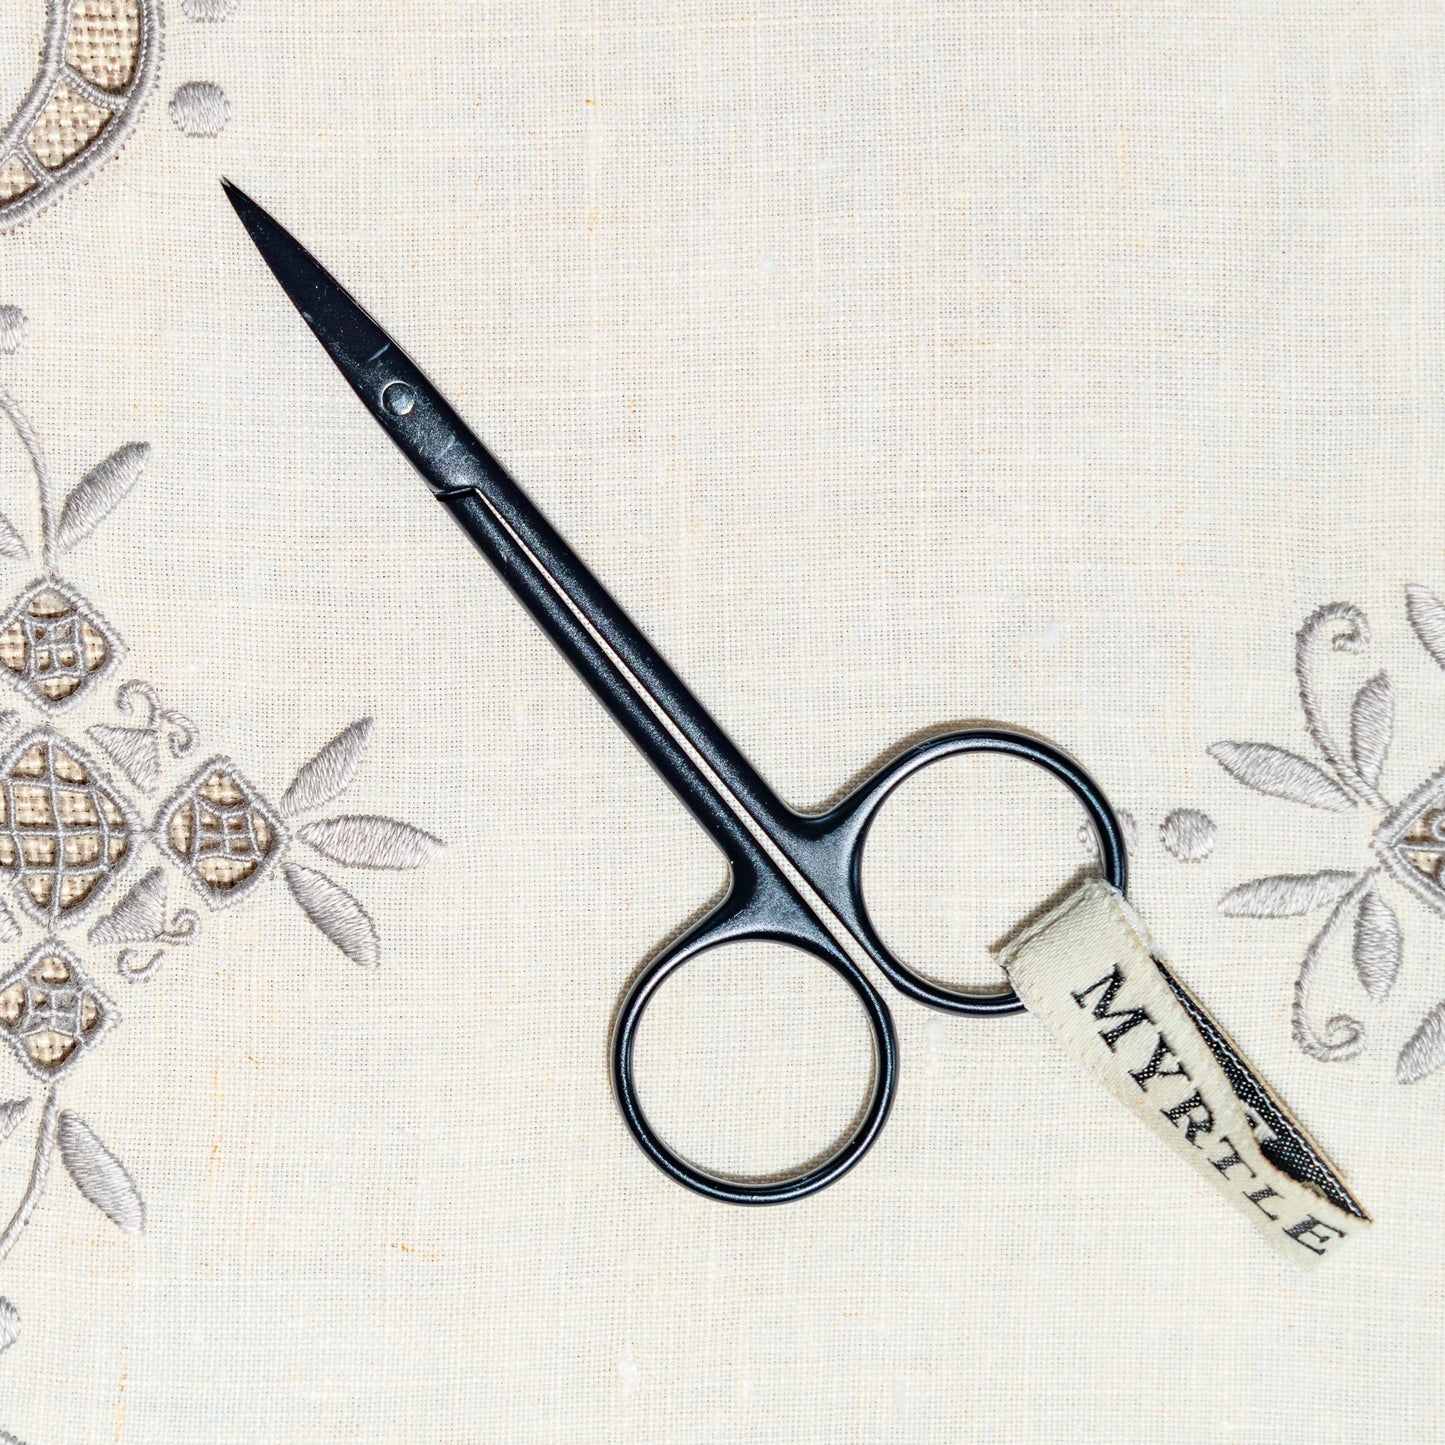 Sharp  Embroidery Scissors - Black powder coated  stainless steel.